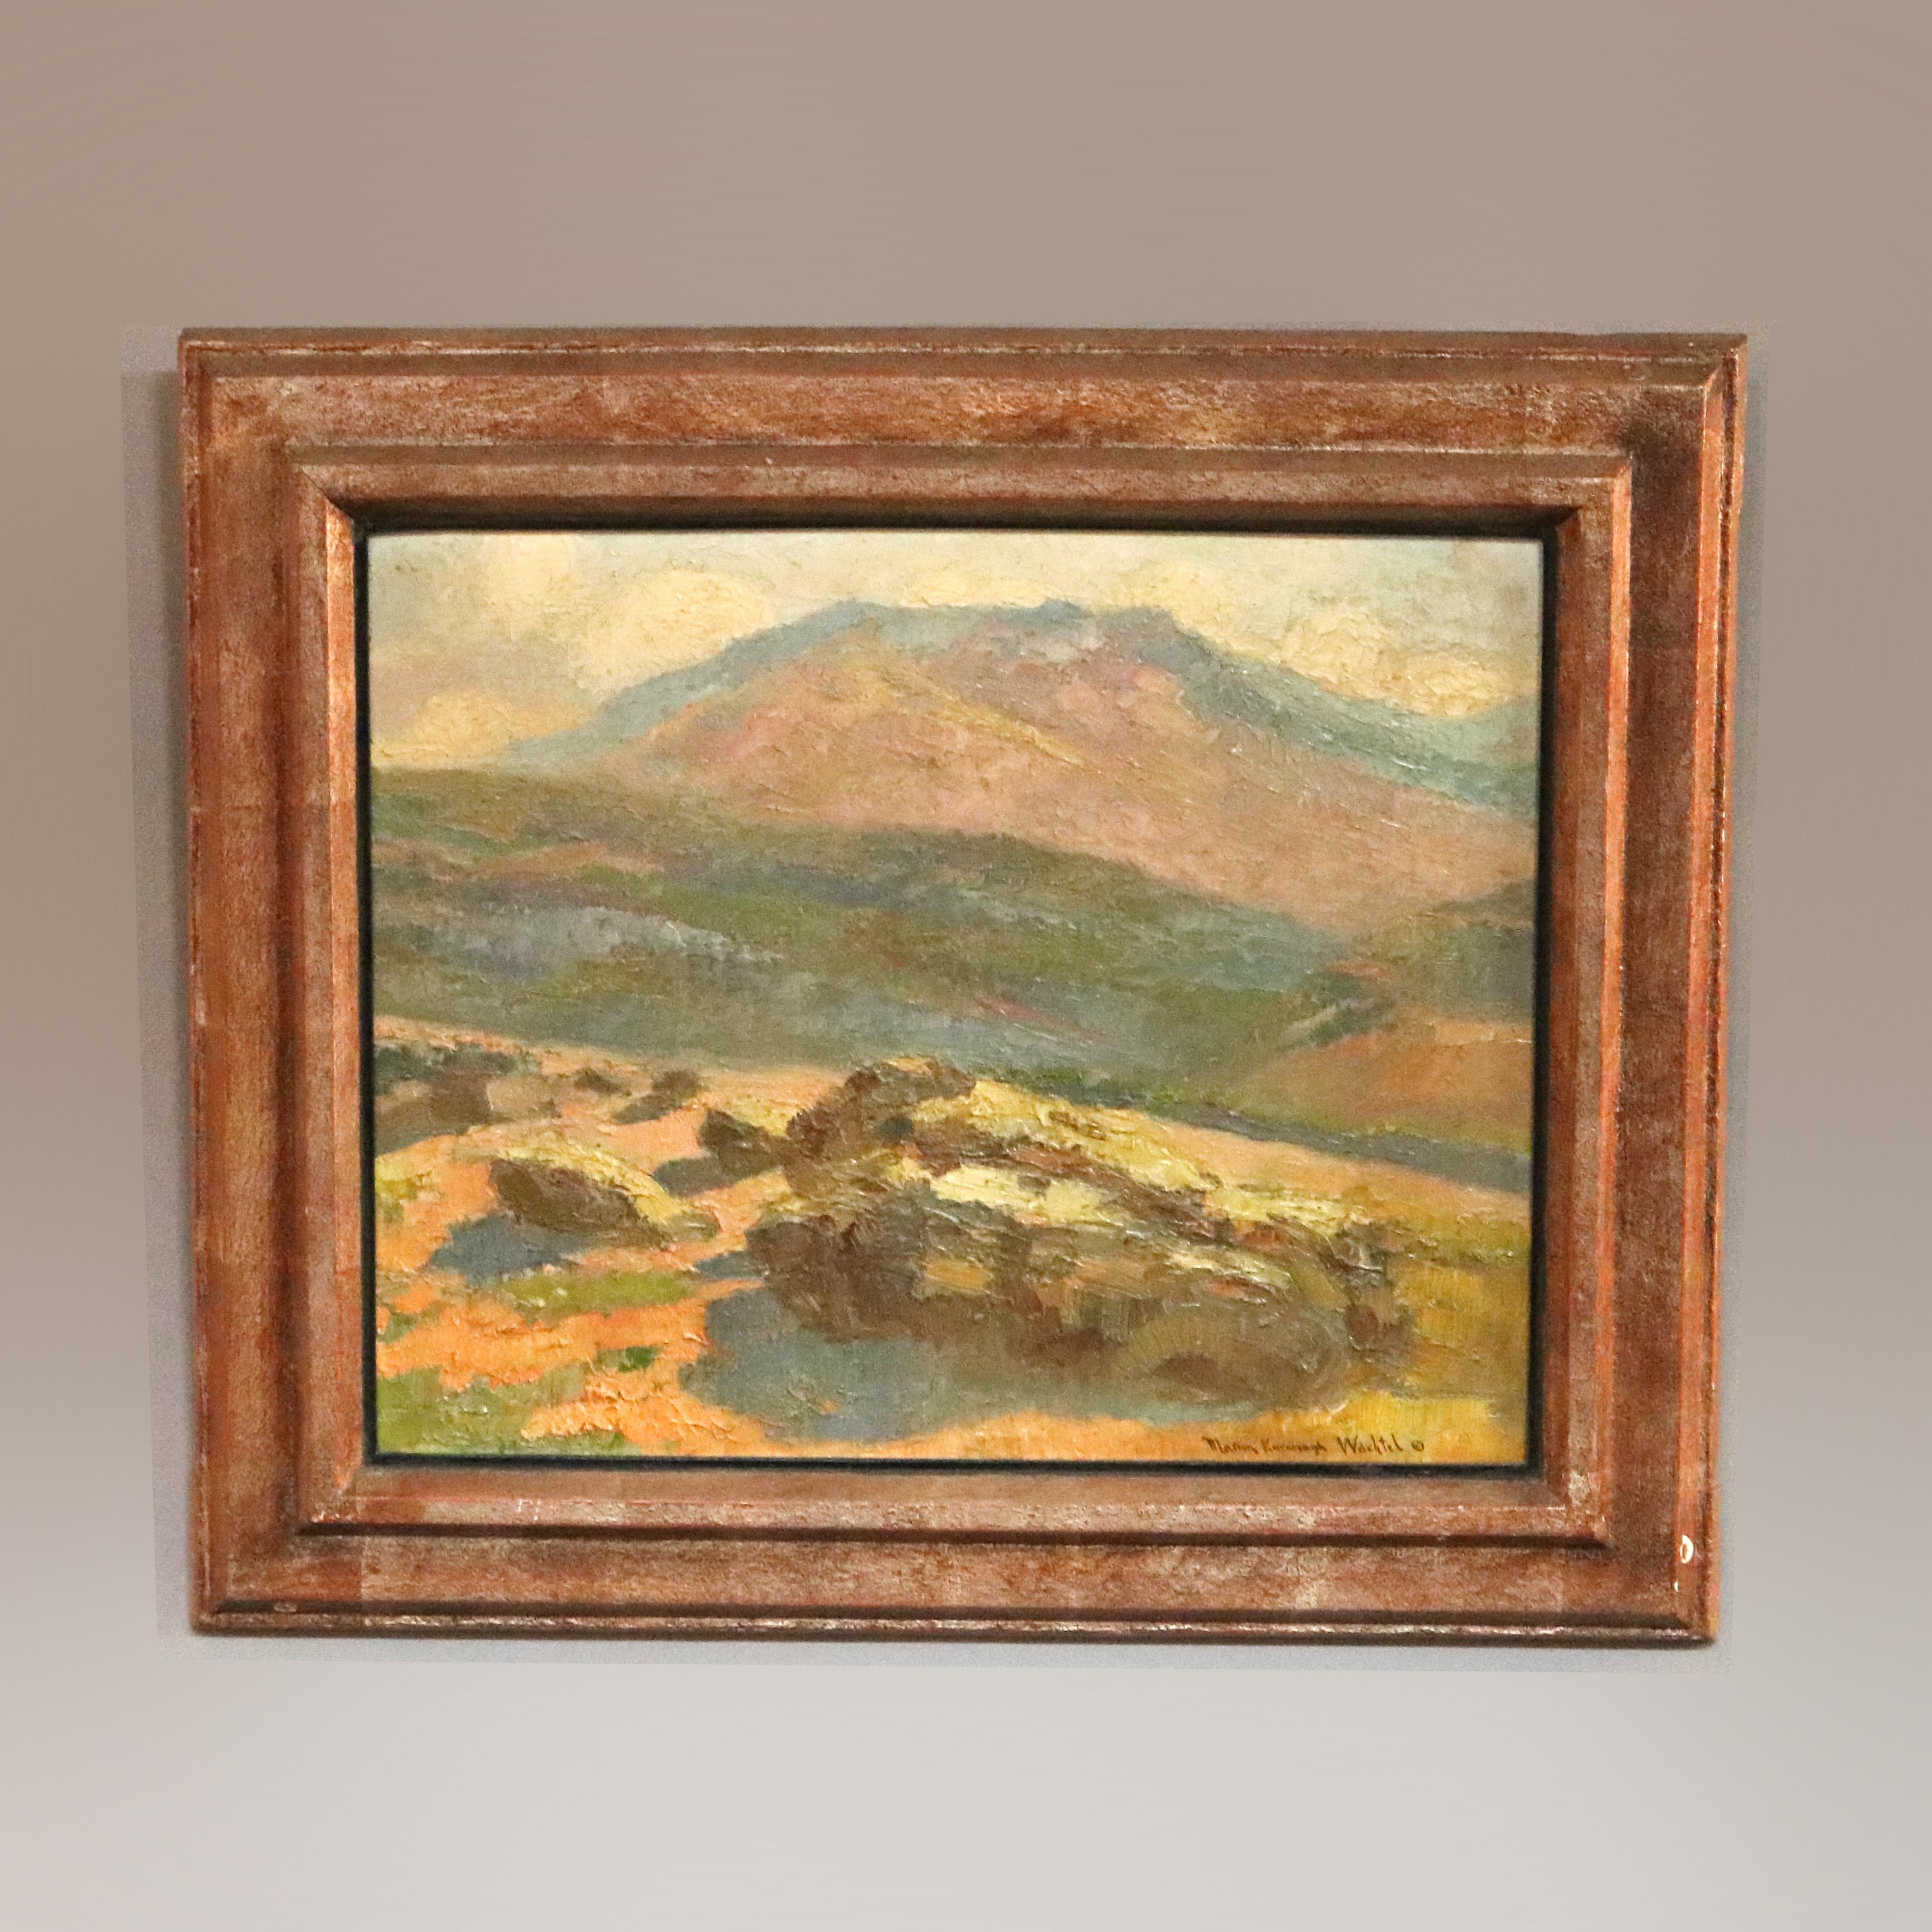 An antique painting by Marion Kavanaugh Wachtel offers impressionist oil on canvas California landscape scene, artist signed lower right, seated in wood frame, c1930

Measures - overall 18''H x 21.25''W x 2''D; sight 16.5'' x 13.25''

Additional